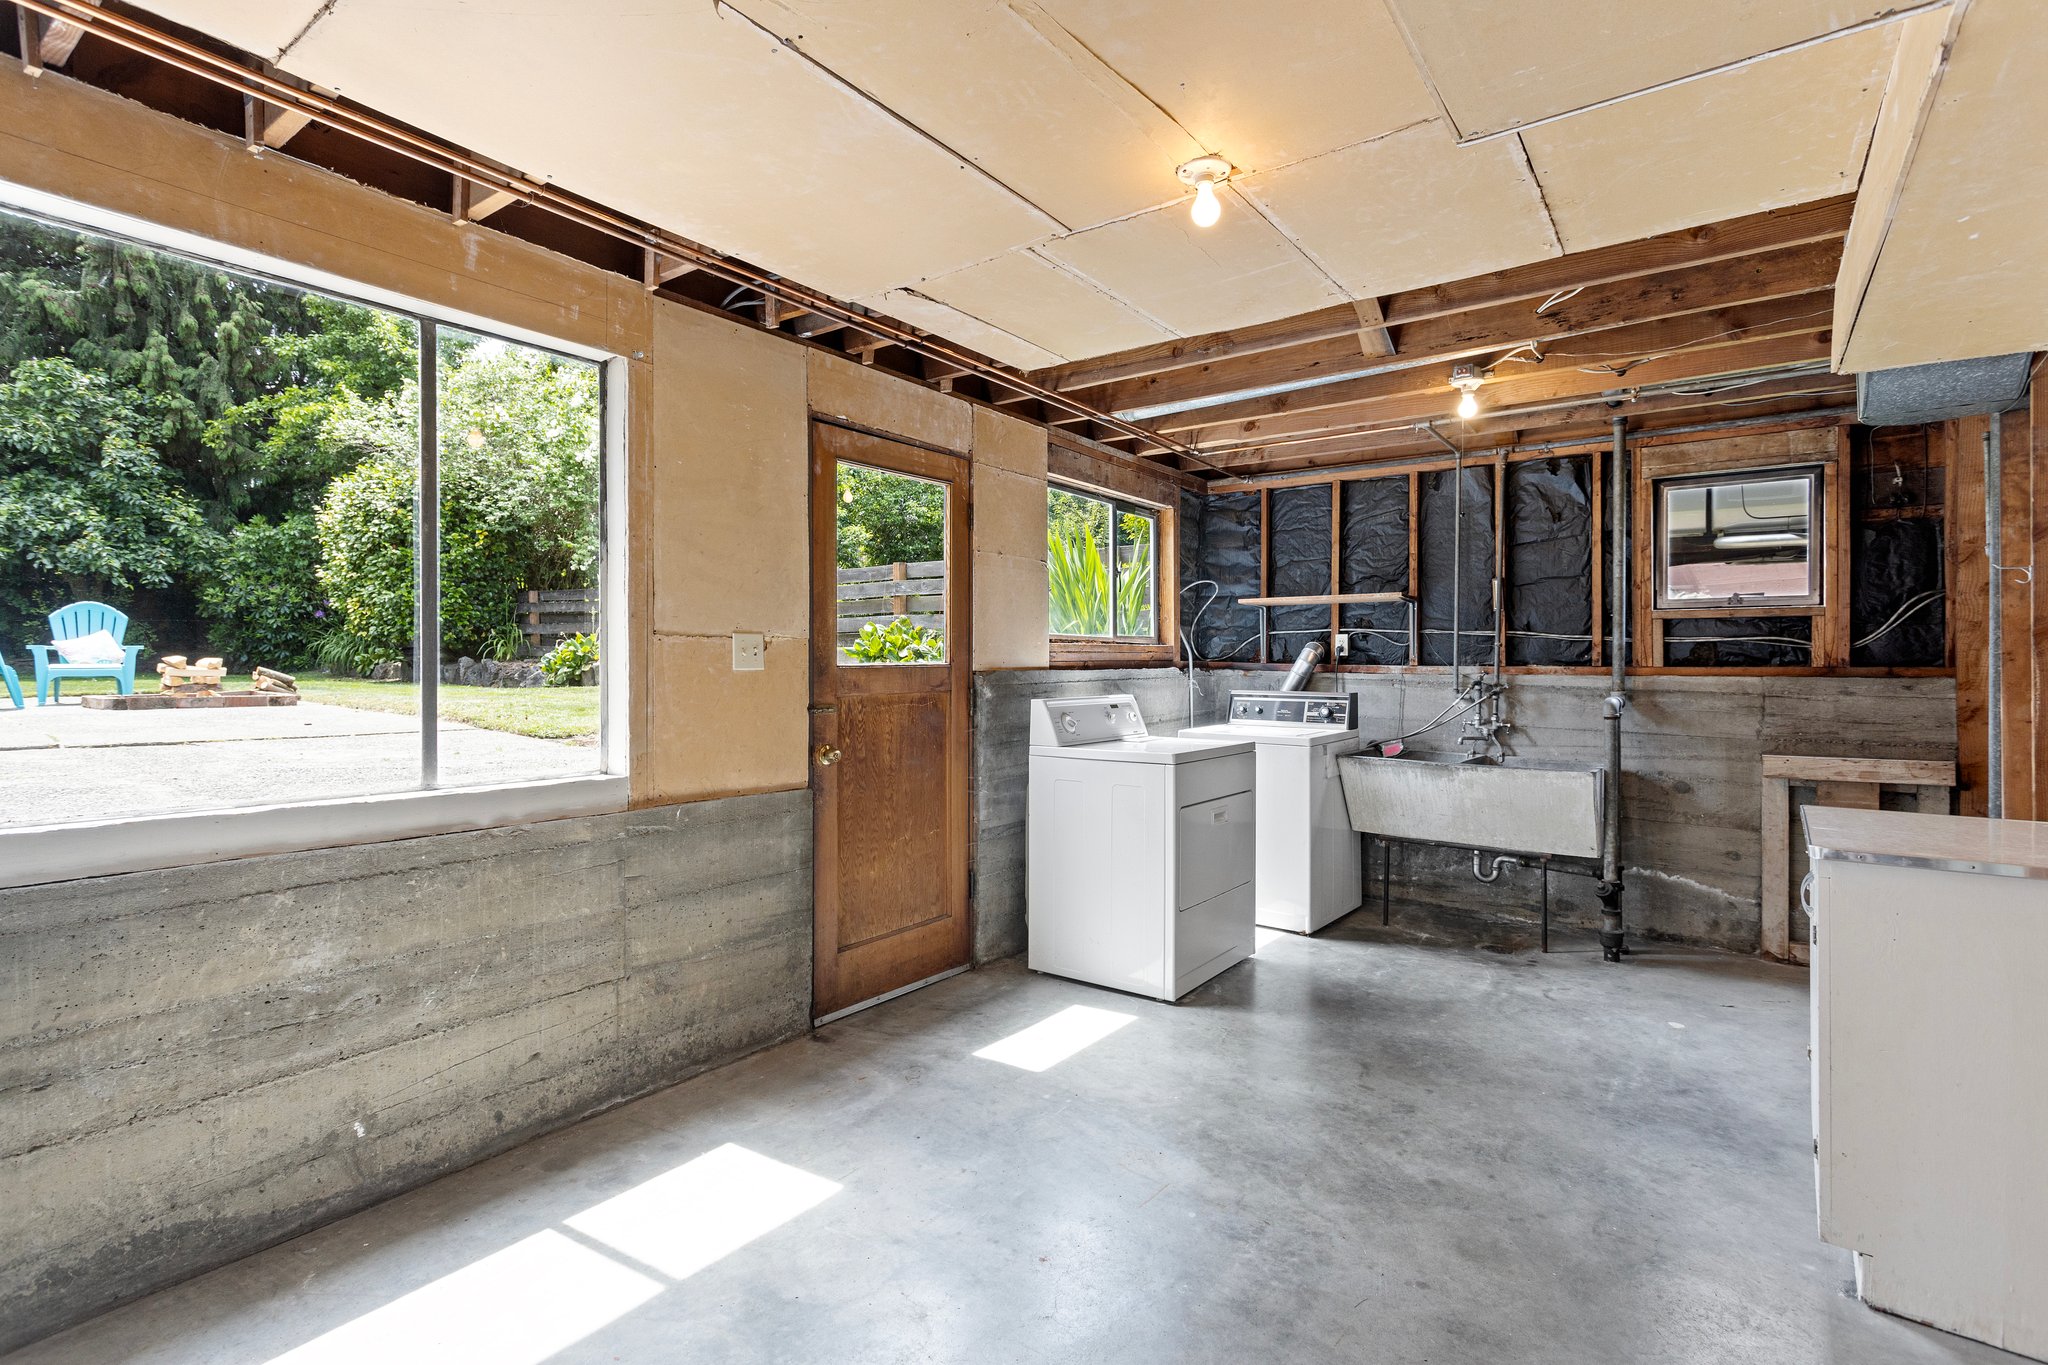 Second bath & kitchen here!? This area is already pre-plumbed for a toilet floor drain and kitchen plumbing, making it easy to add a second bathroom and kitchen and increase your home’s value.